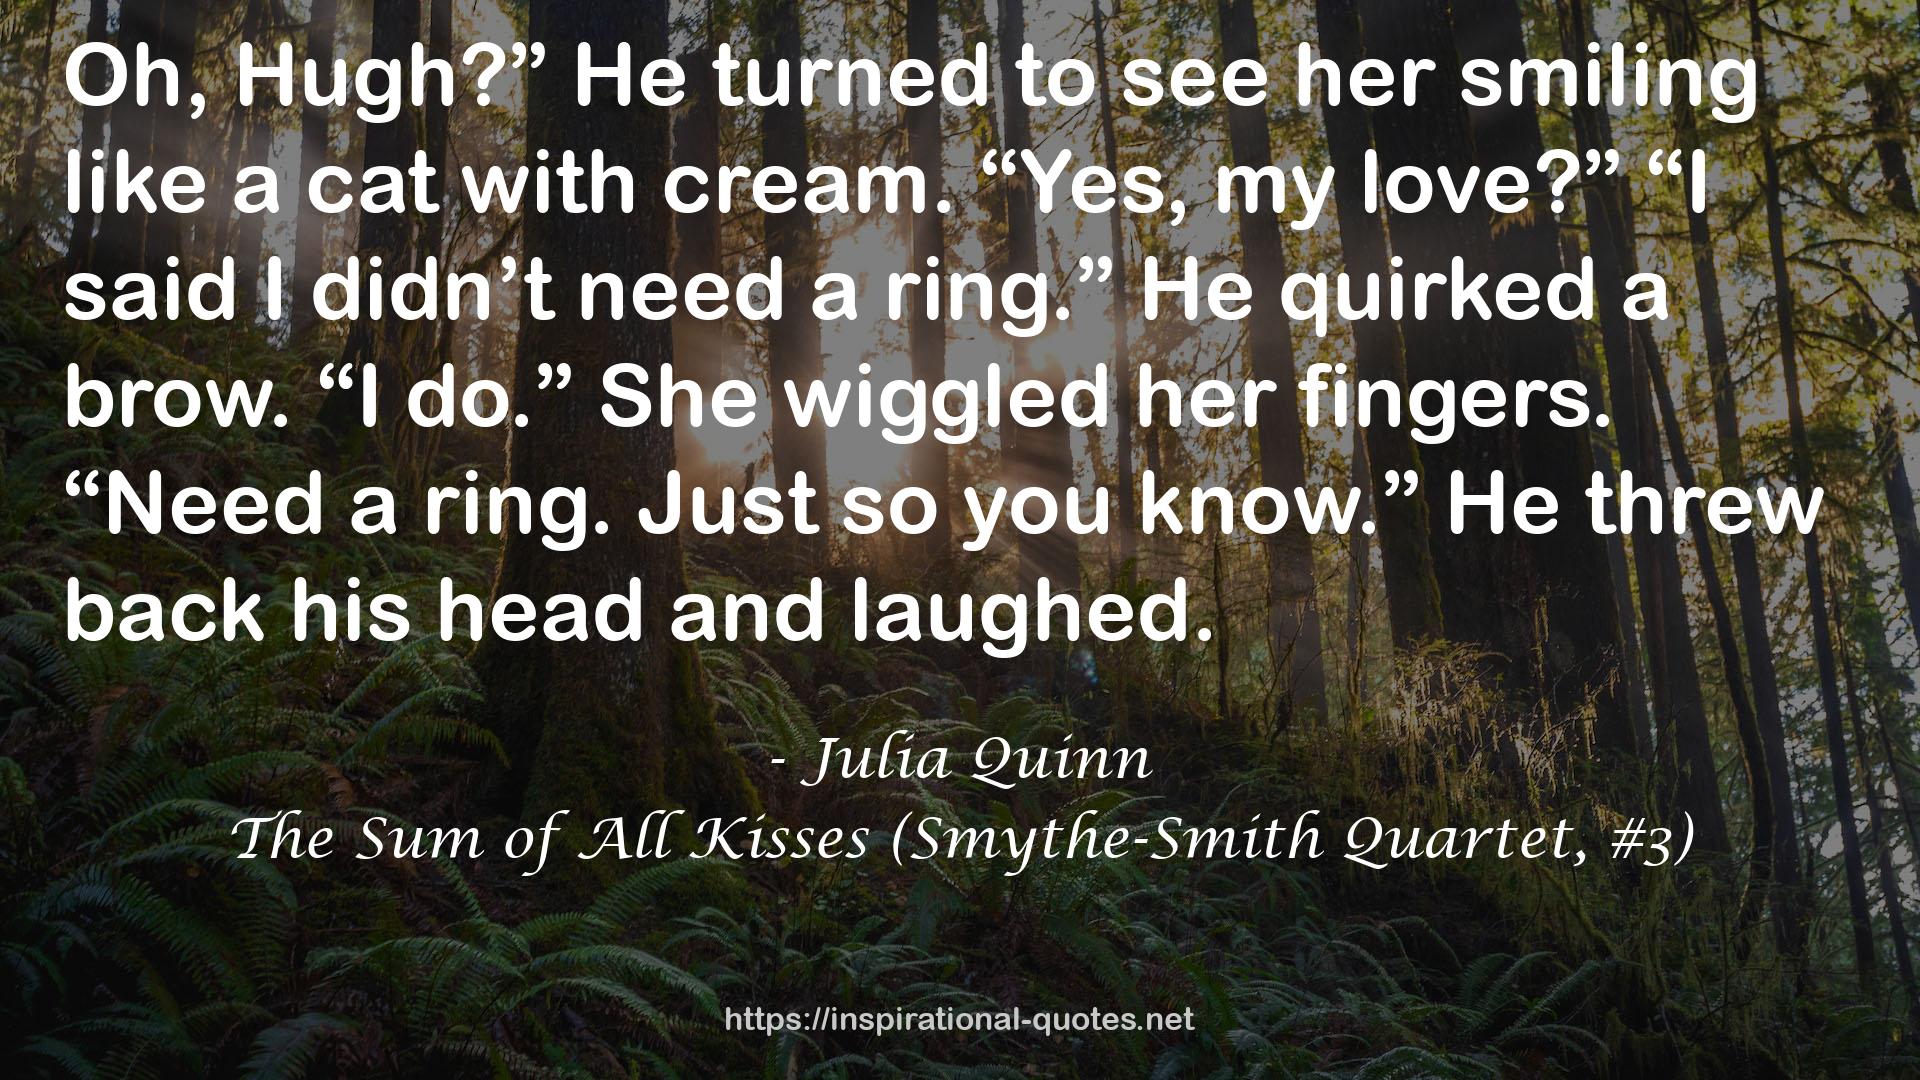 The Sum of All Kisses (Smythe-Smith Quartet, #3) QUOTES